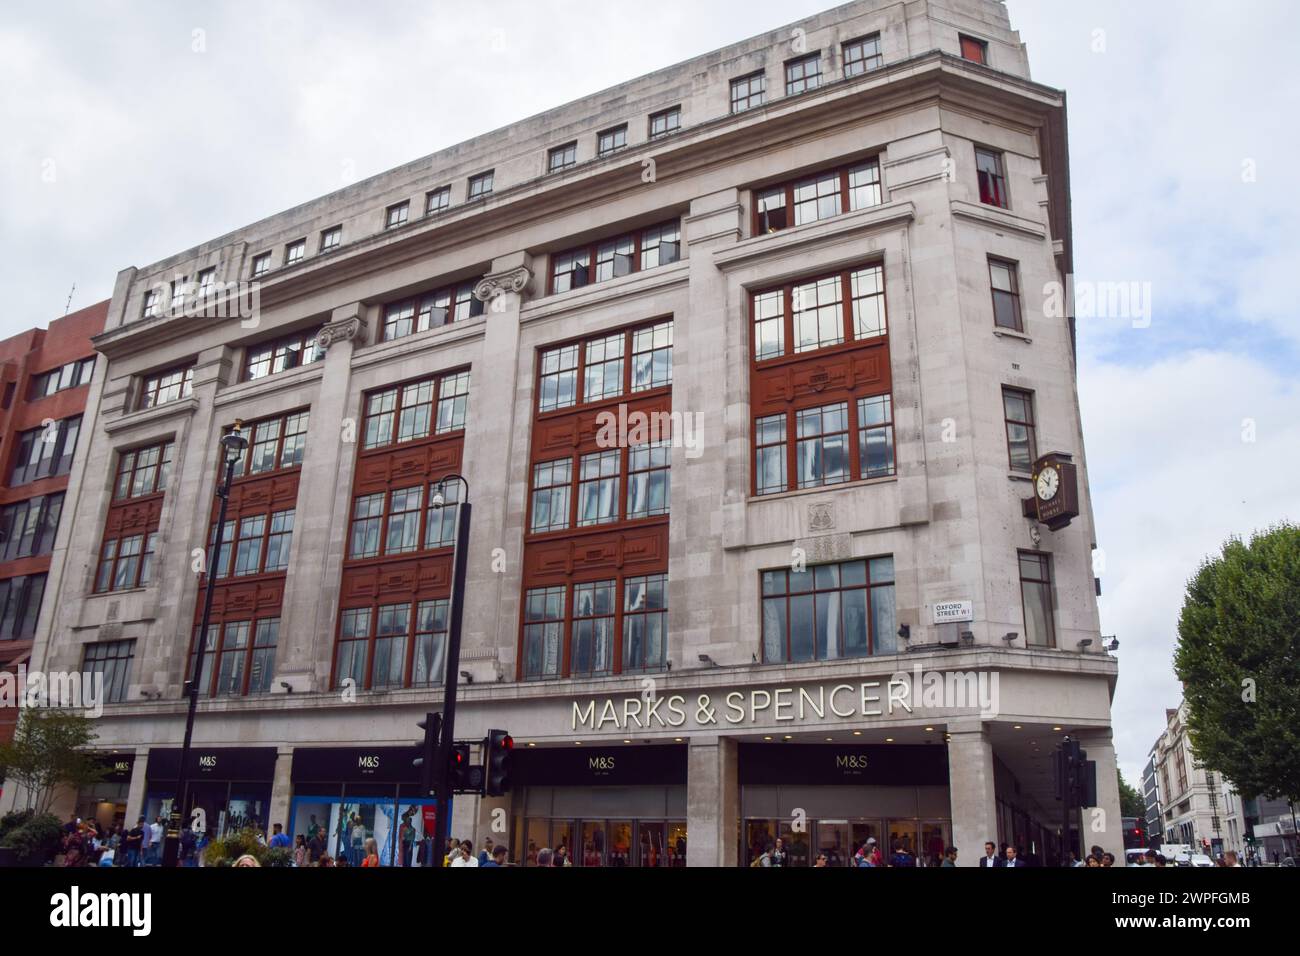 London, UK. 22nd August 2022. Exterior view of Marks & Spencer store on Oxford Street. Credit: Vuk Valcic/Alamy Stock Photo